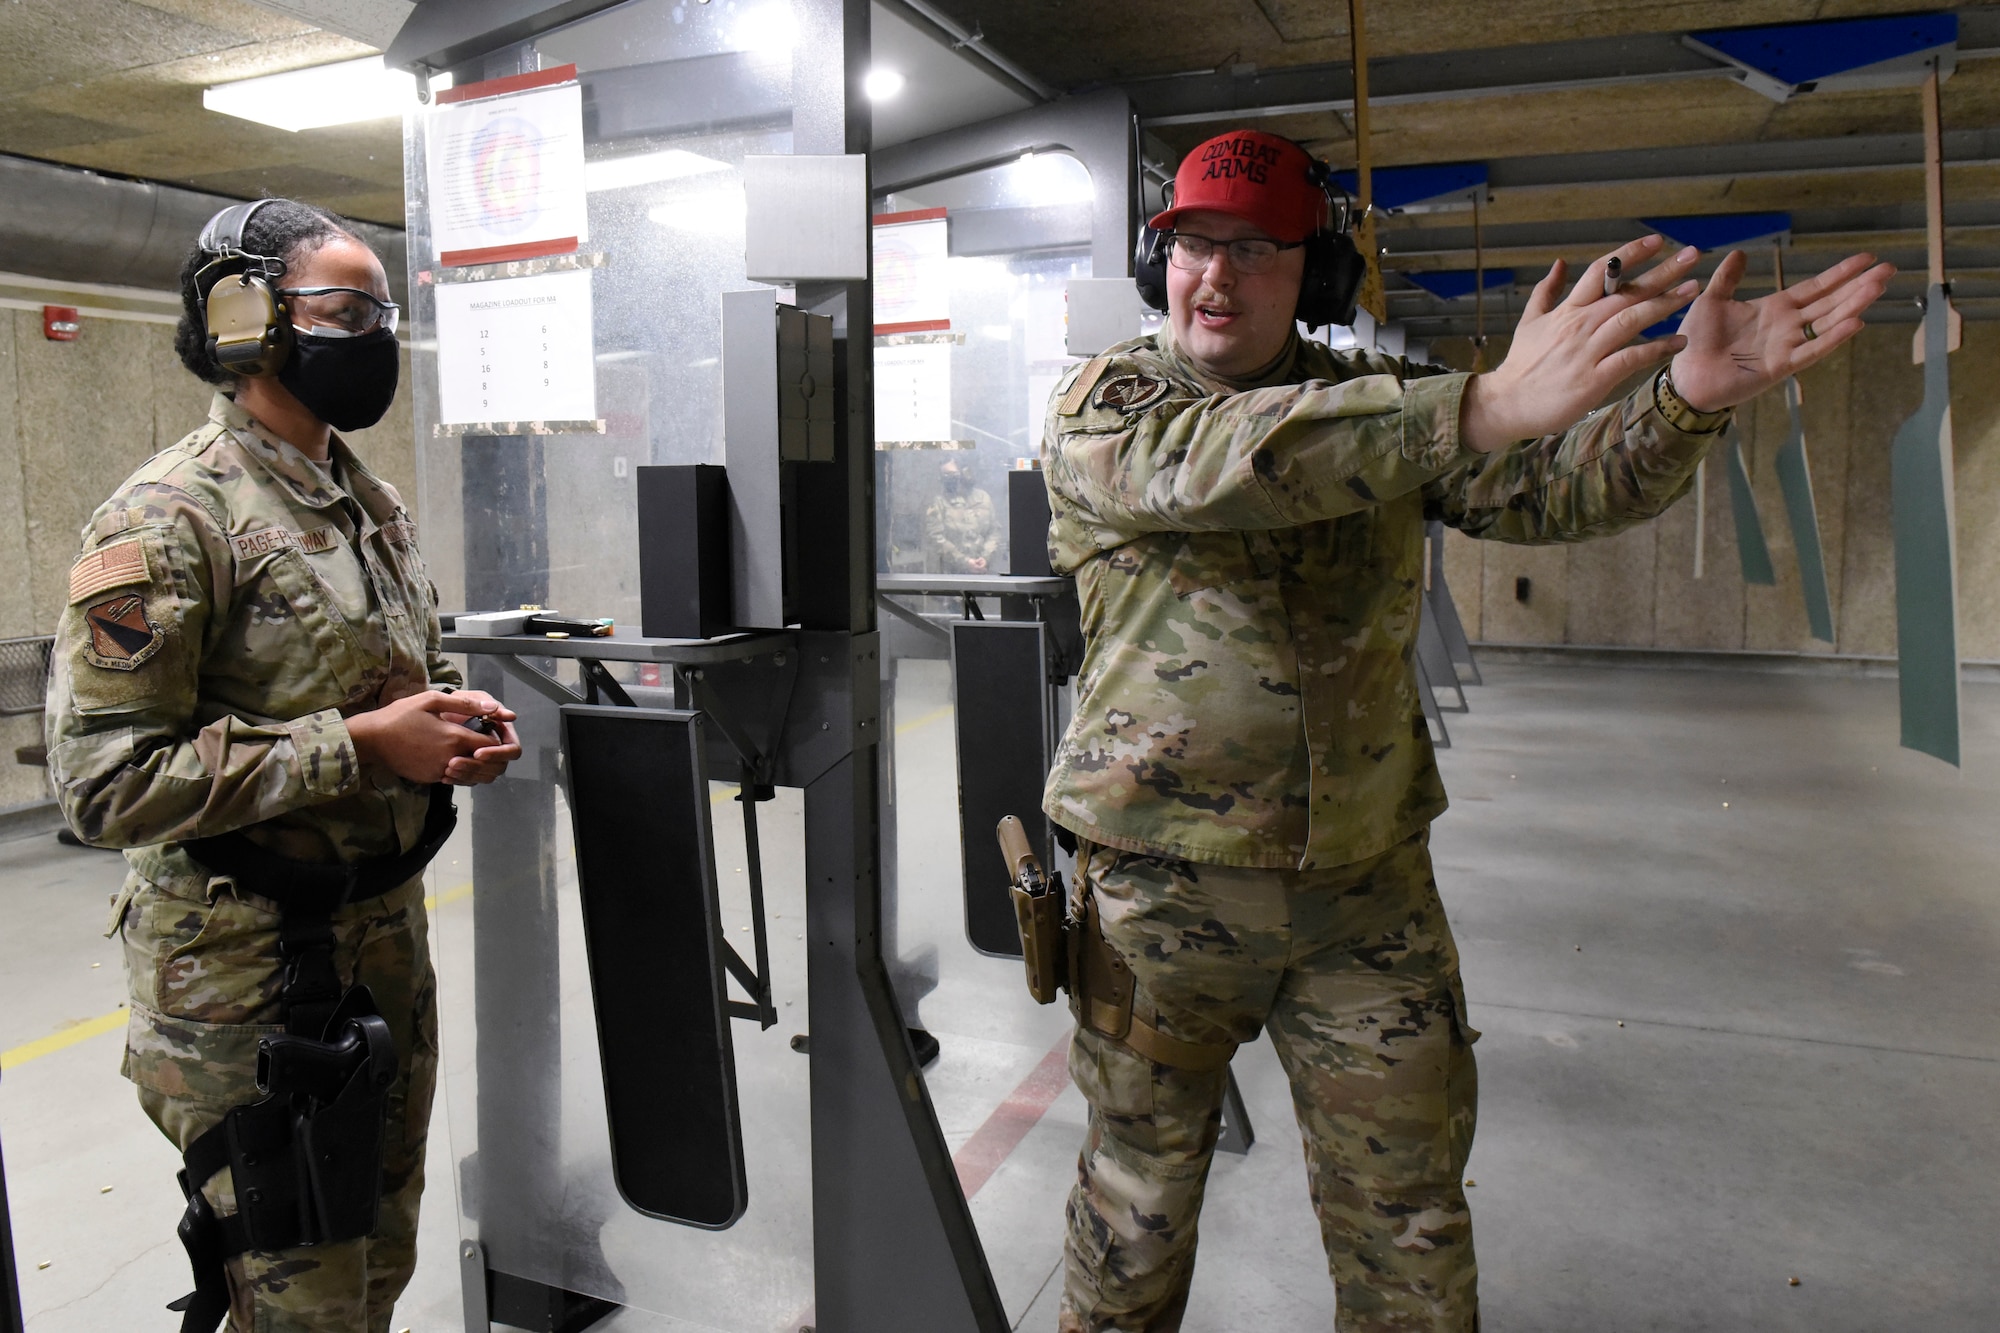 Air Force Senior Airman Clayton Nyp, an 88th Security Forces Squadron combat arms instructor, right, works with 1st Lt. Elisabeth Page-Pettiway an 88th Medical Group executive officer, as she qualifies with the M9 pistol inside the 88th Security Forces Squadron Combat Arms firing range at Wright-Patterson Air Force Base, Ohio on Feb. 18, 2021. Weapons qualification is part of the readiness standards for the 88th Air Base Wing. (U.S. Air Force photo by Ty Greenlees)